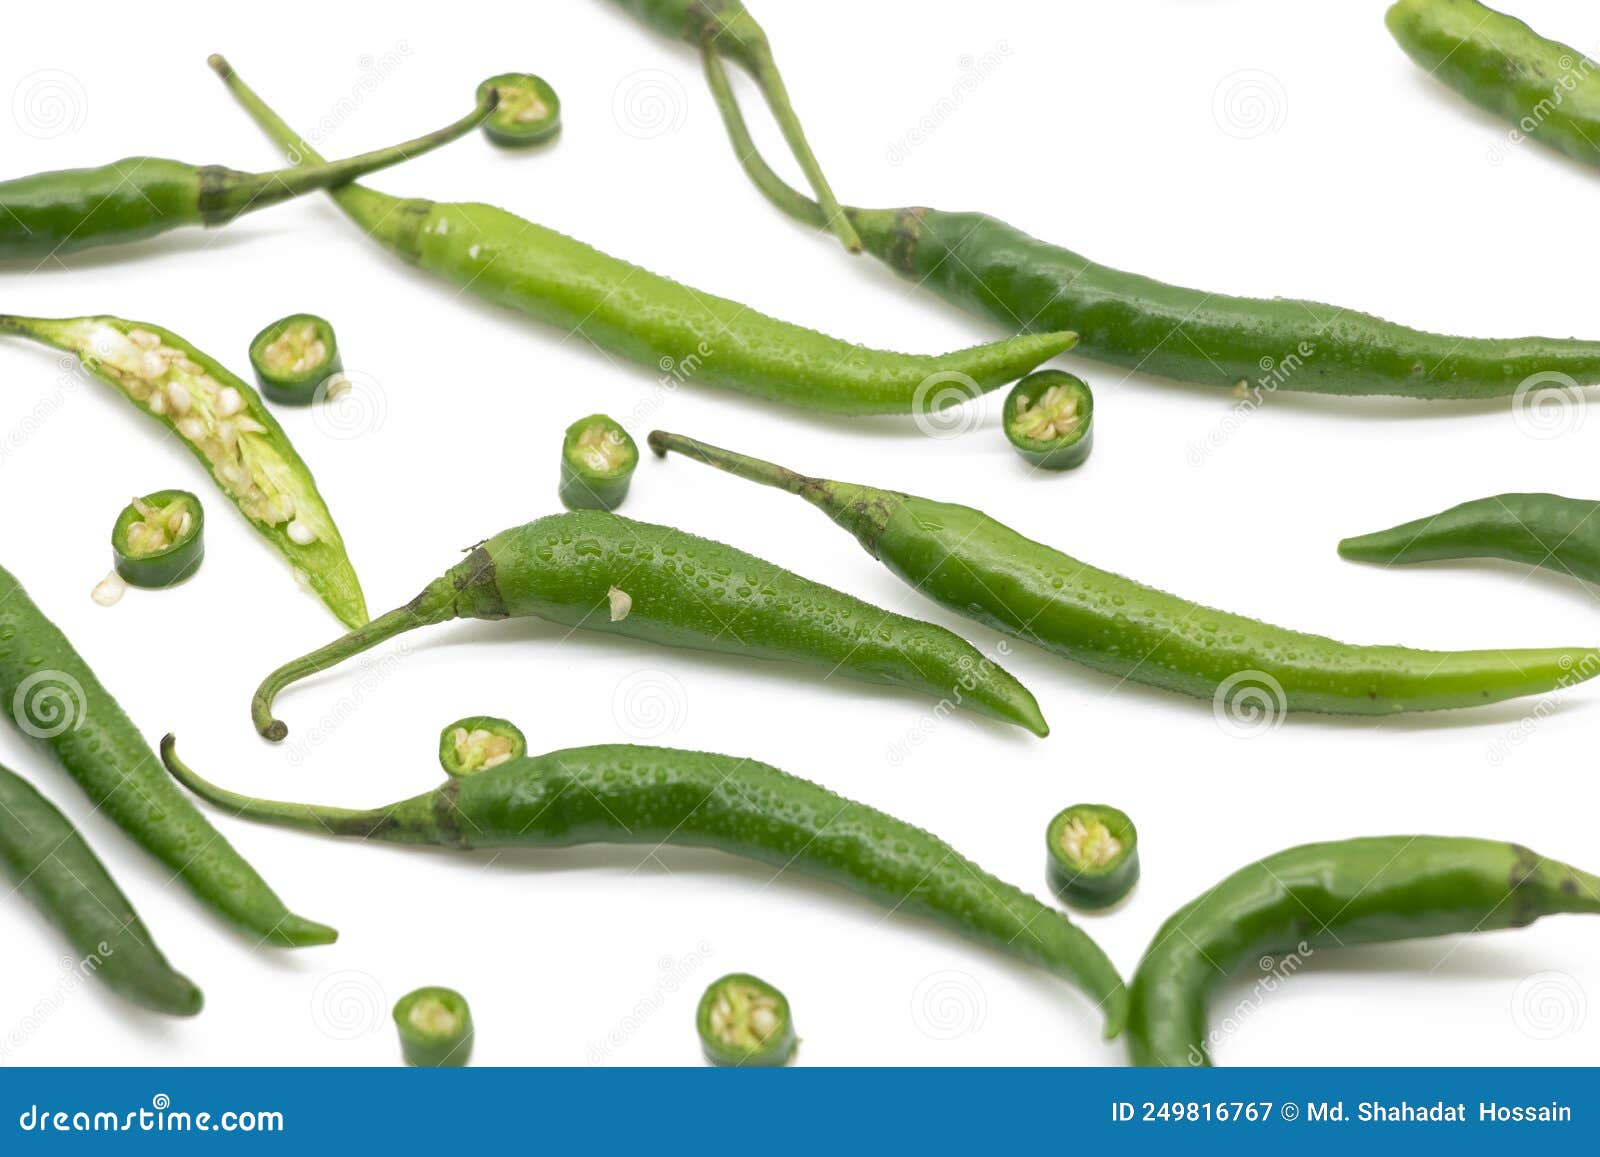 whole and slices lumbre green chili pepper  on white background